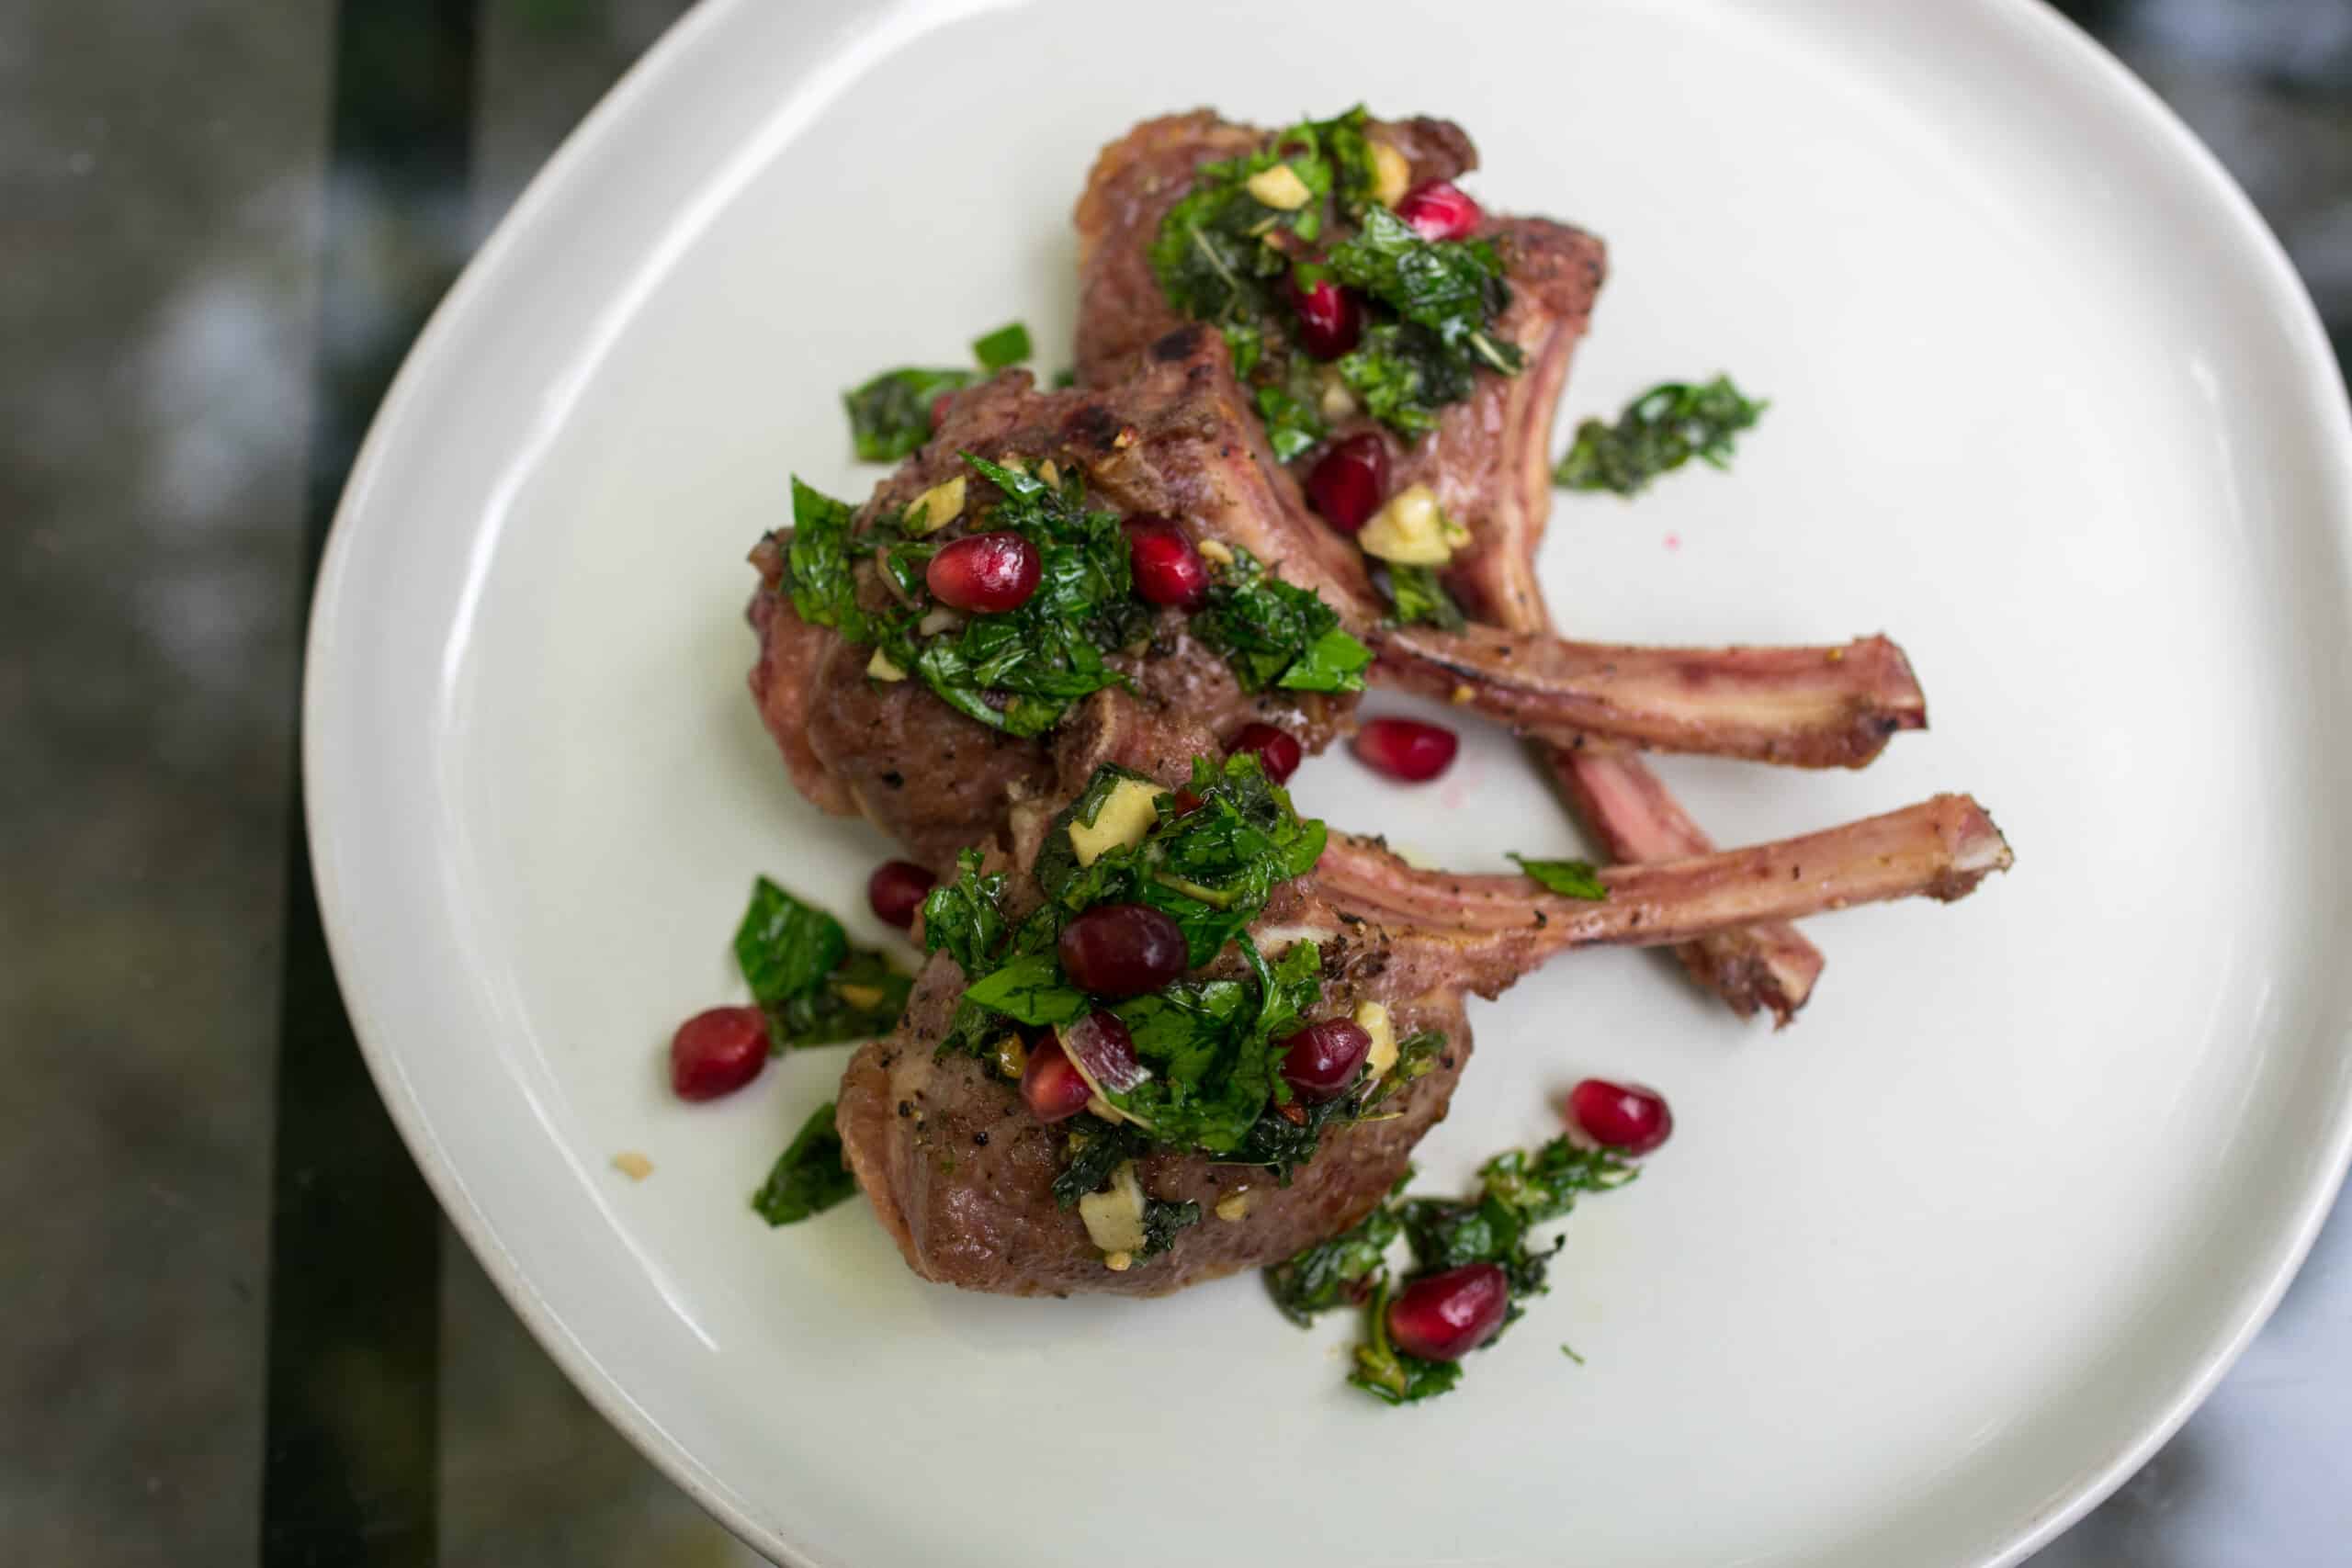 Lollipop with Pomegranate Chimichurri Featured